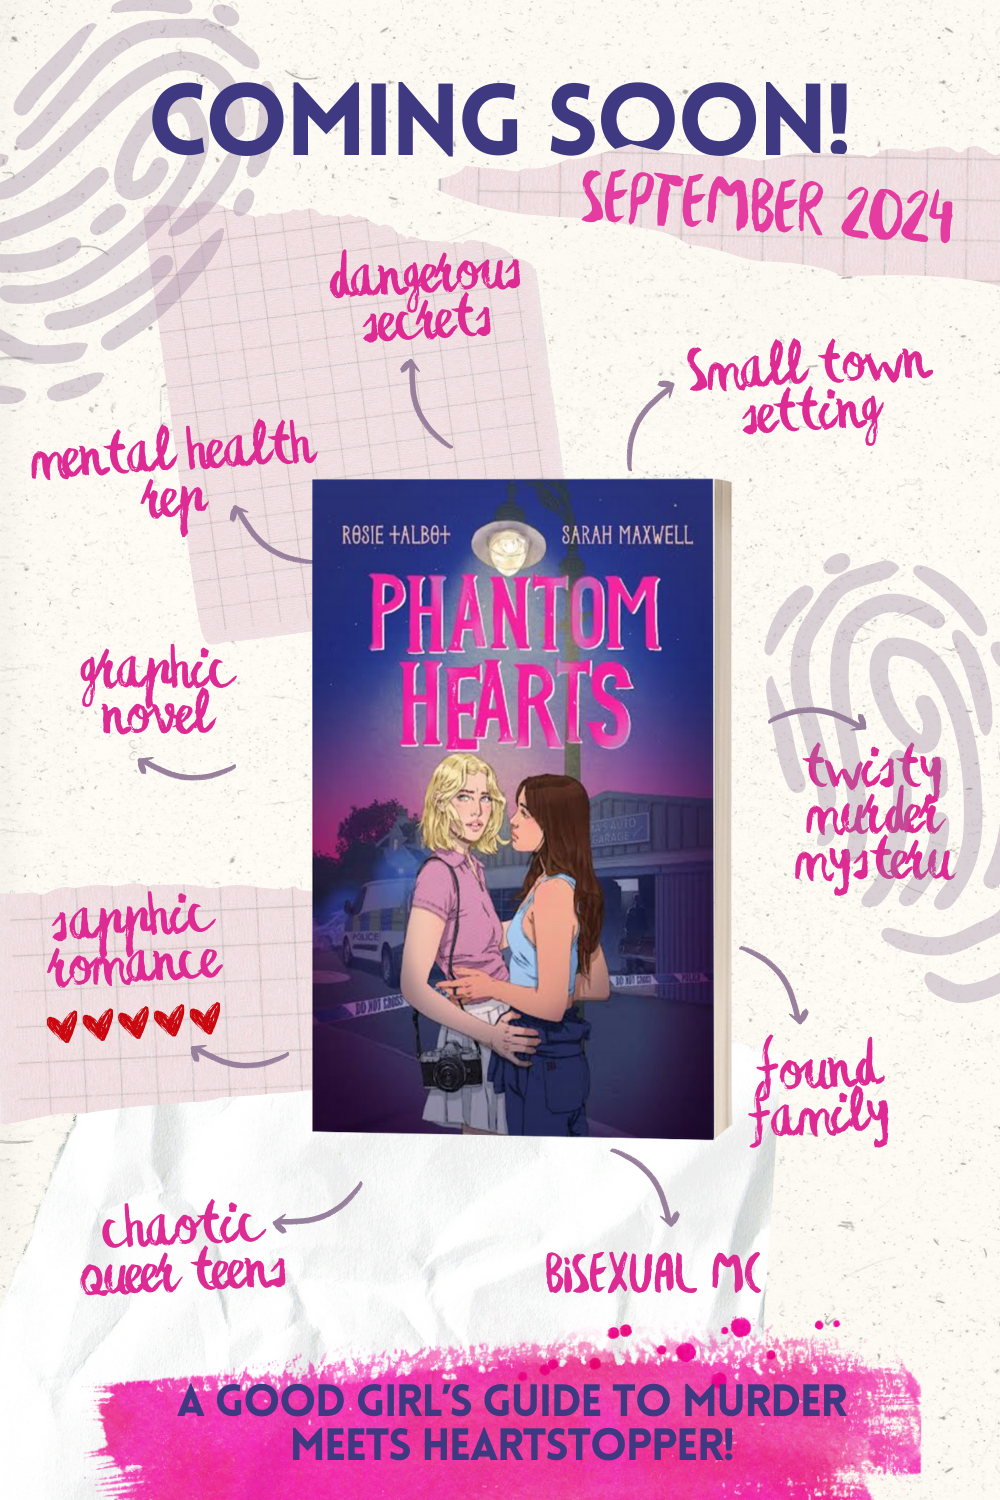 A poster for a book called phantom hearts is coming soon.